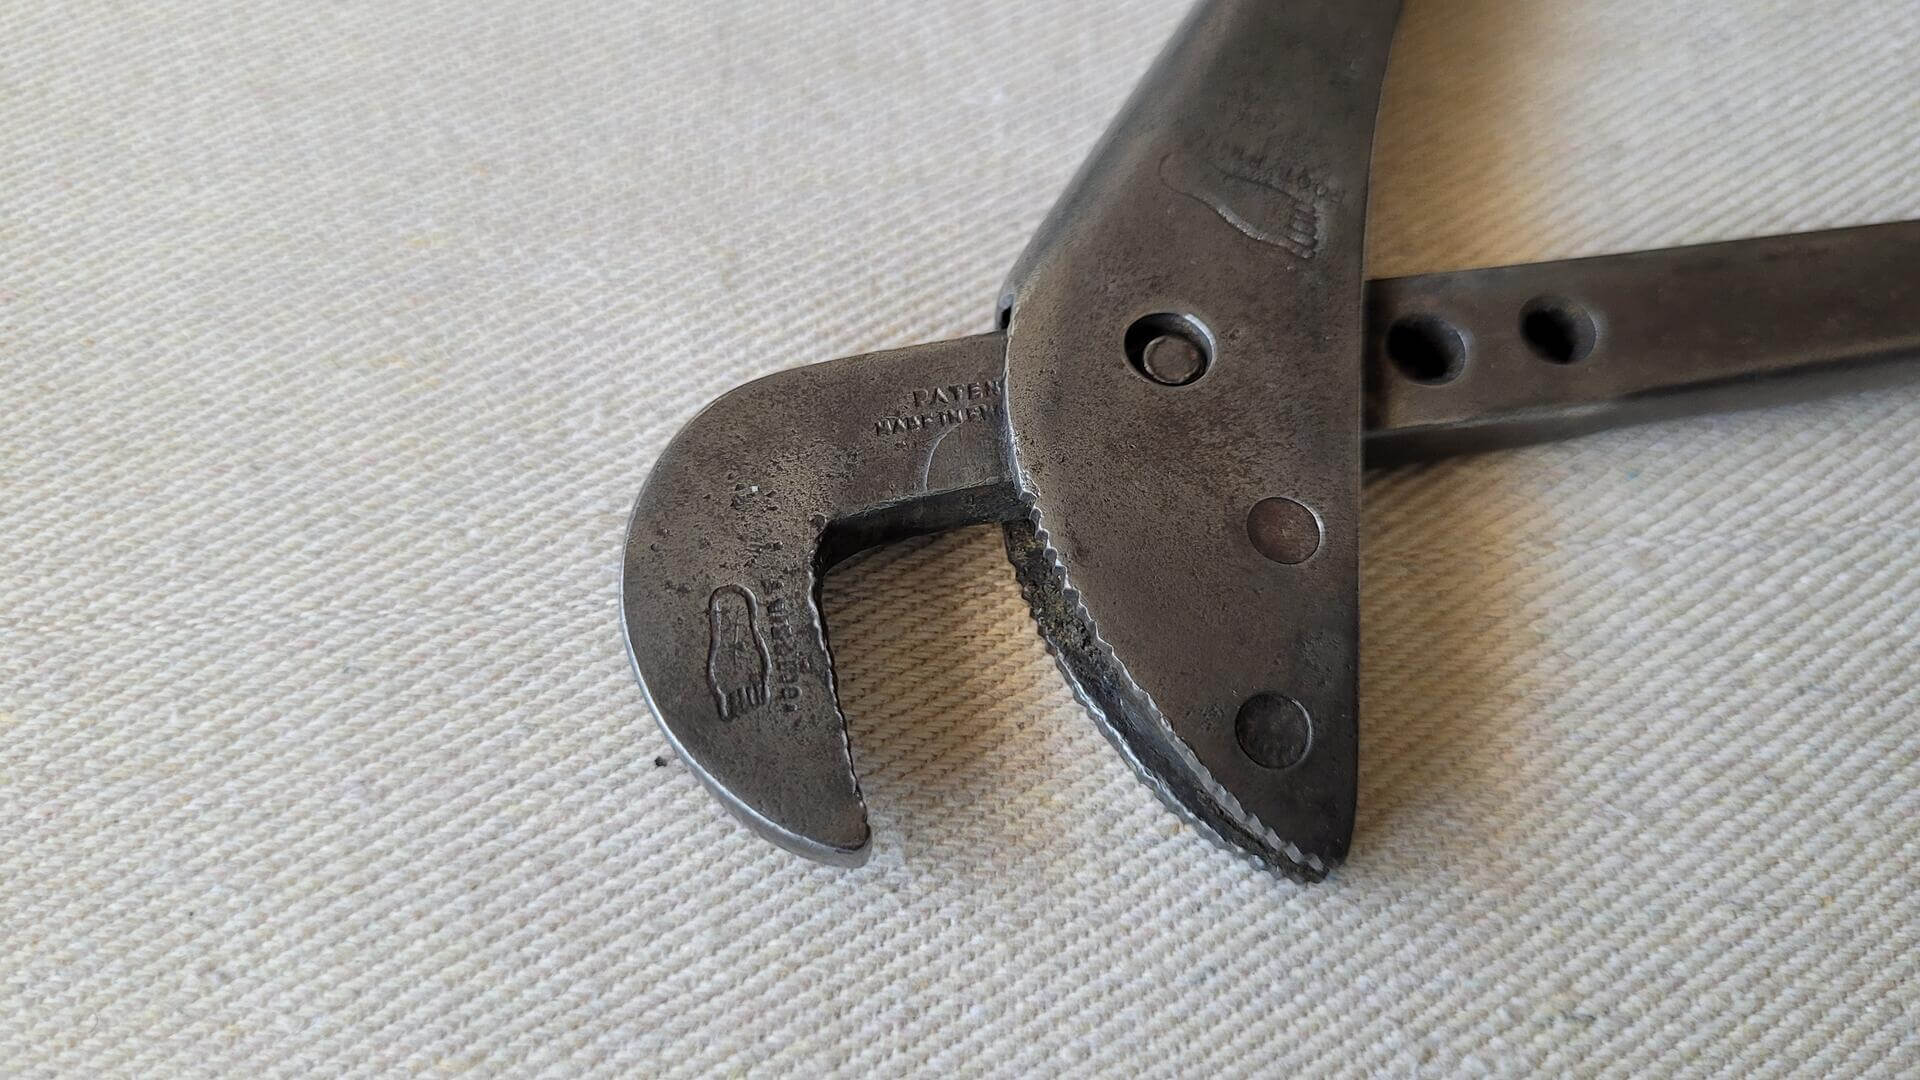 Antique Footprint Original Pattern adjustable pipe wrench spanner designed in 1875 with pin screw and slotted screwdriver end. Vintage made in Sheffield England collectible plumber, electrician, and pipe fitter gripping hand tools